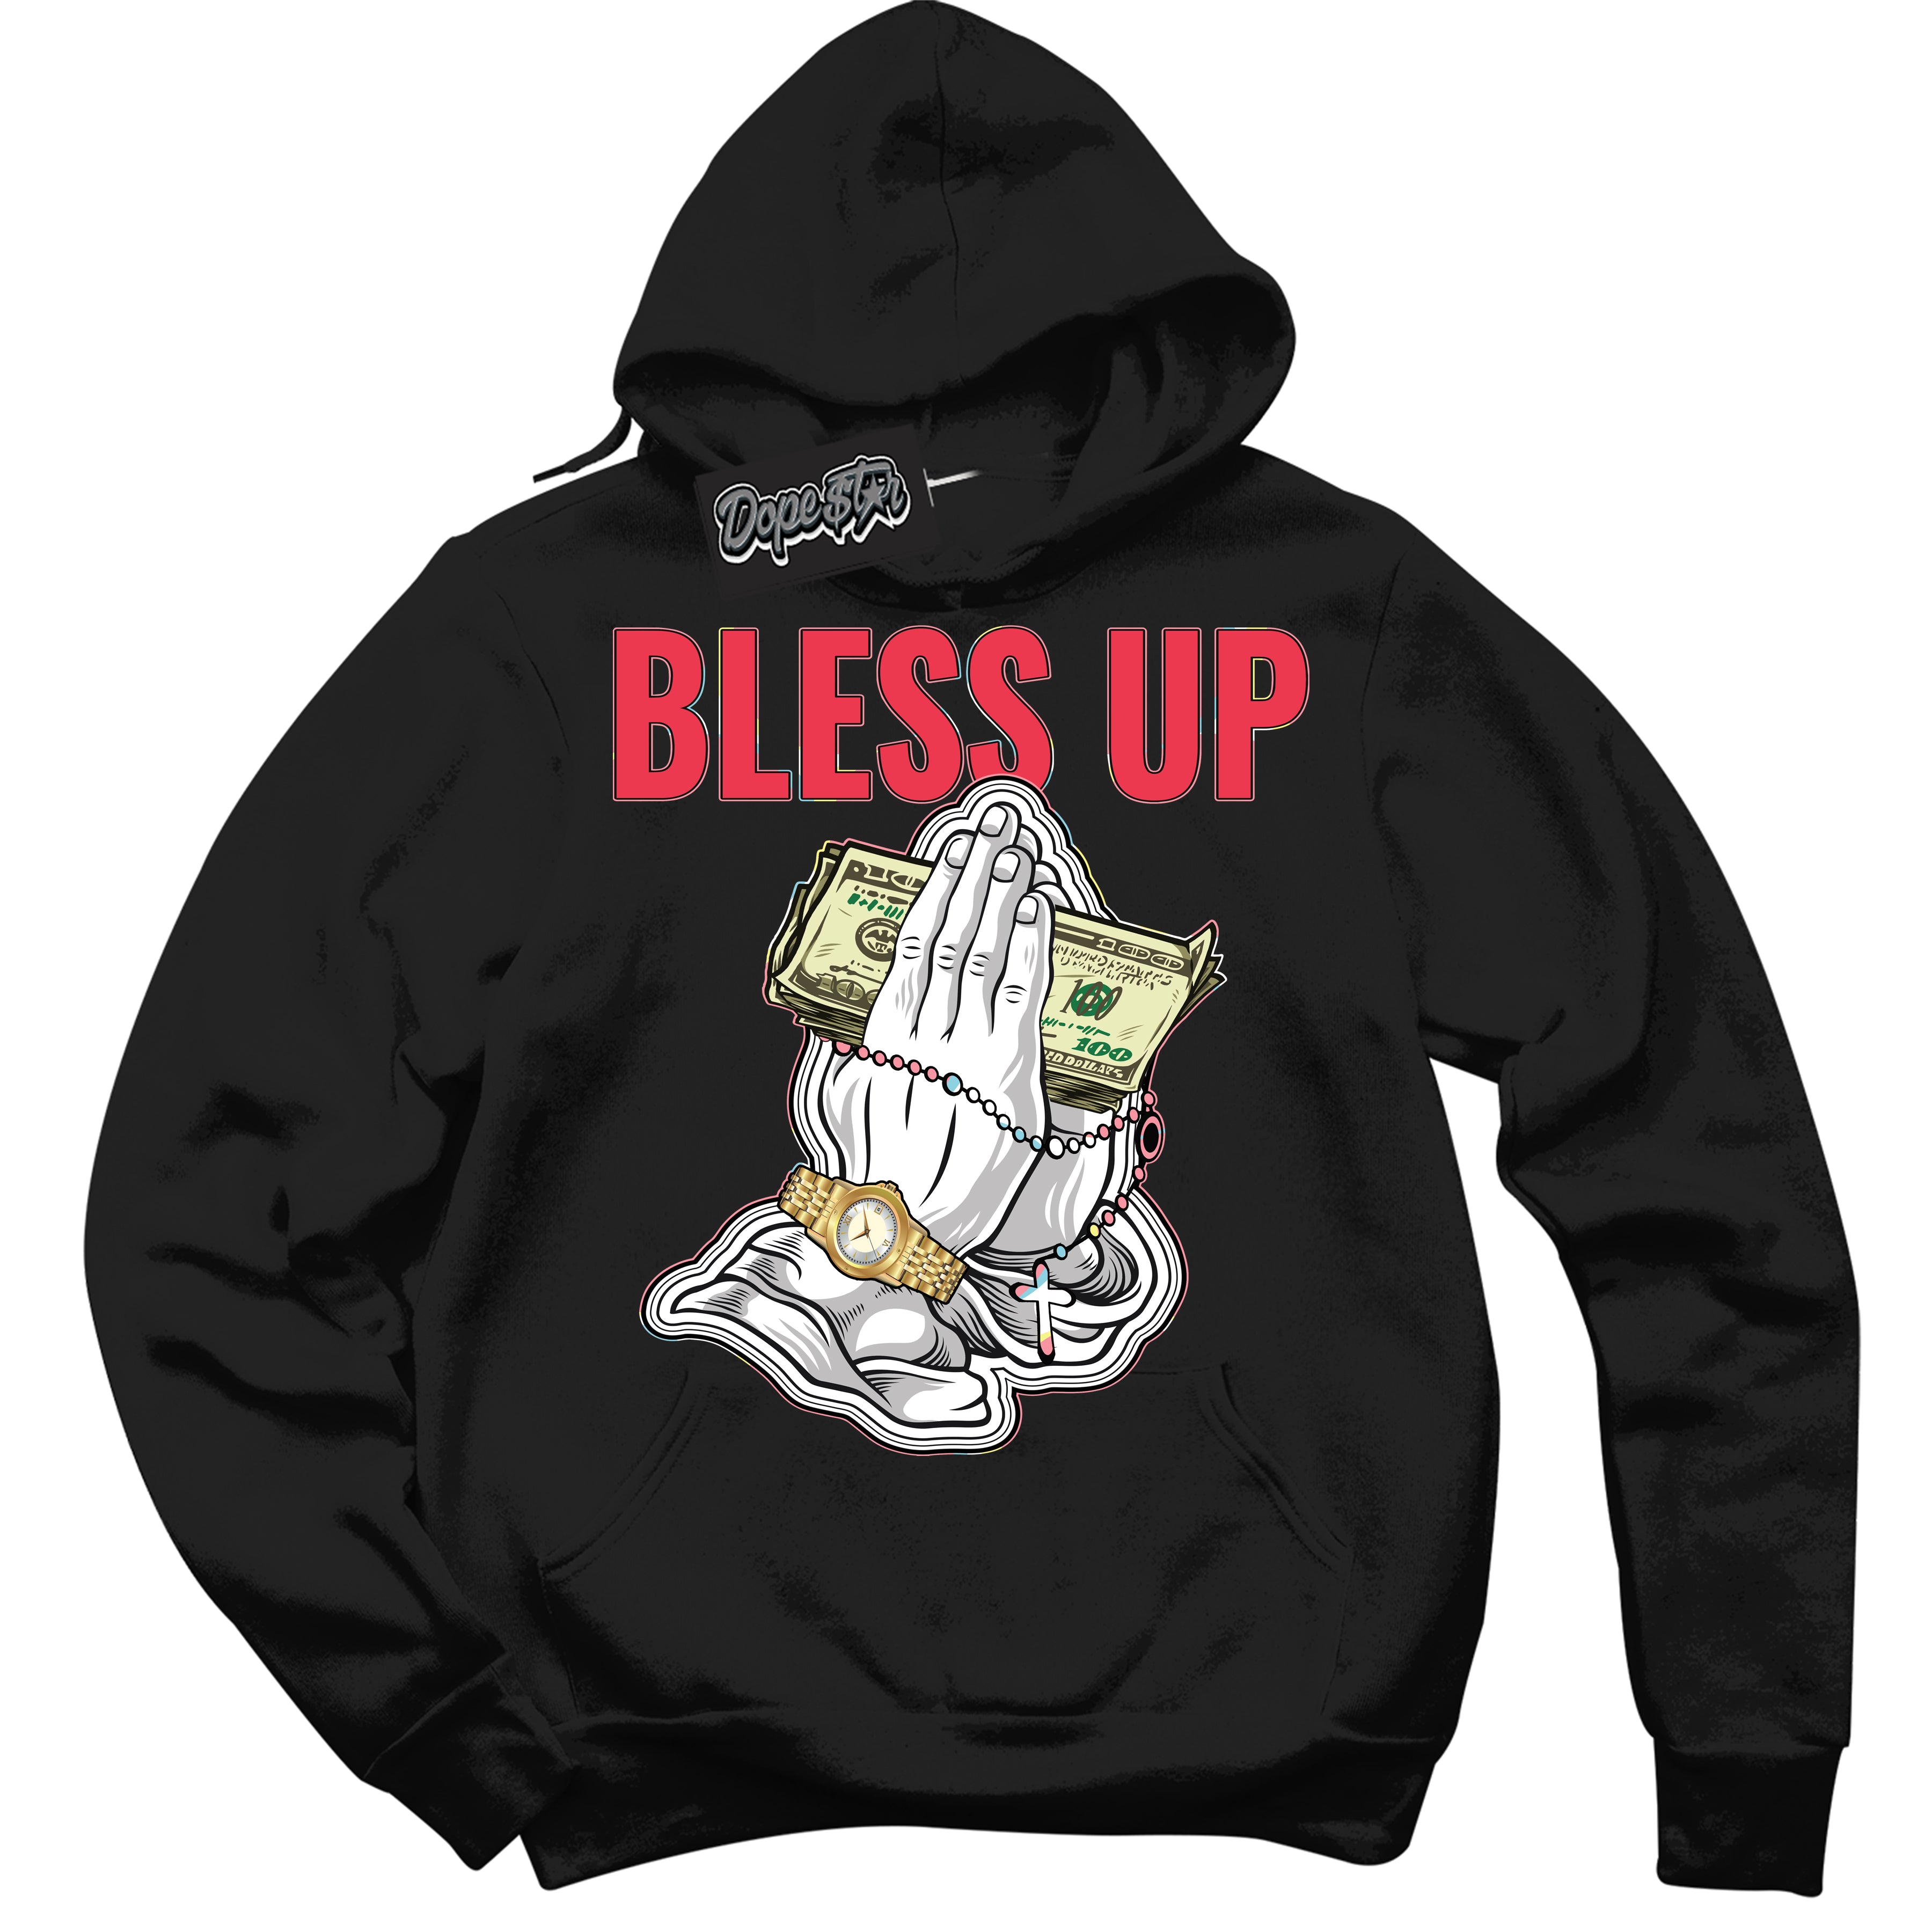 Cool Black Graphic DopeStar Hoodie with “ Bless Up “ print, that perfectly matches Spider-Verse 1s sneakers